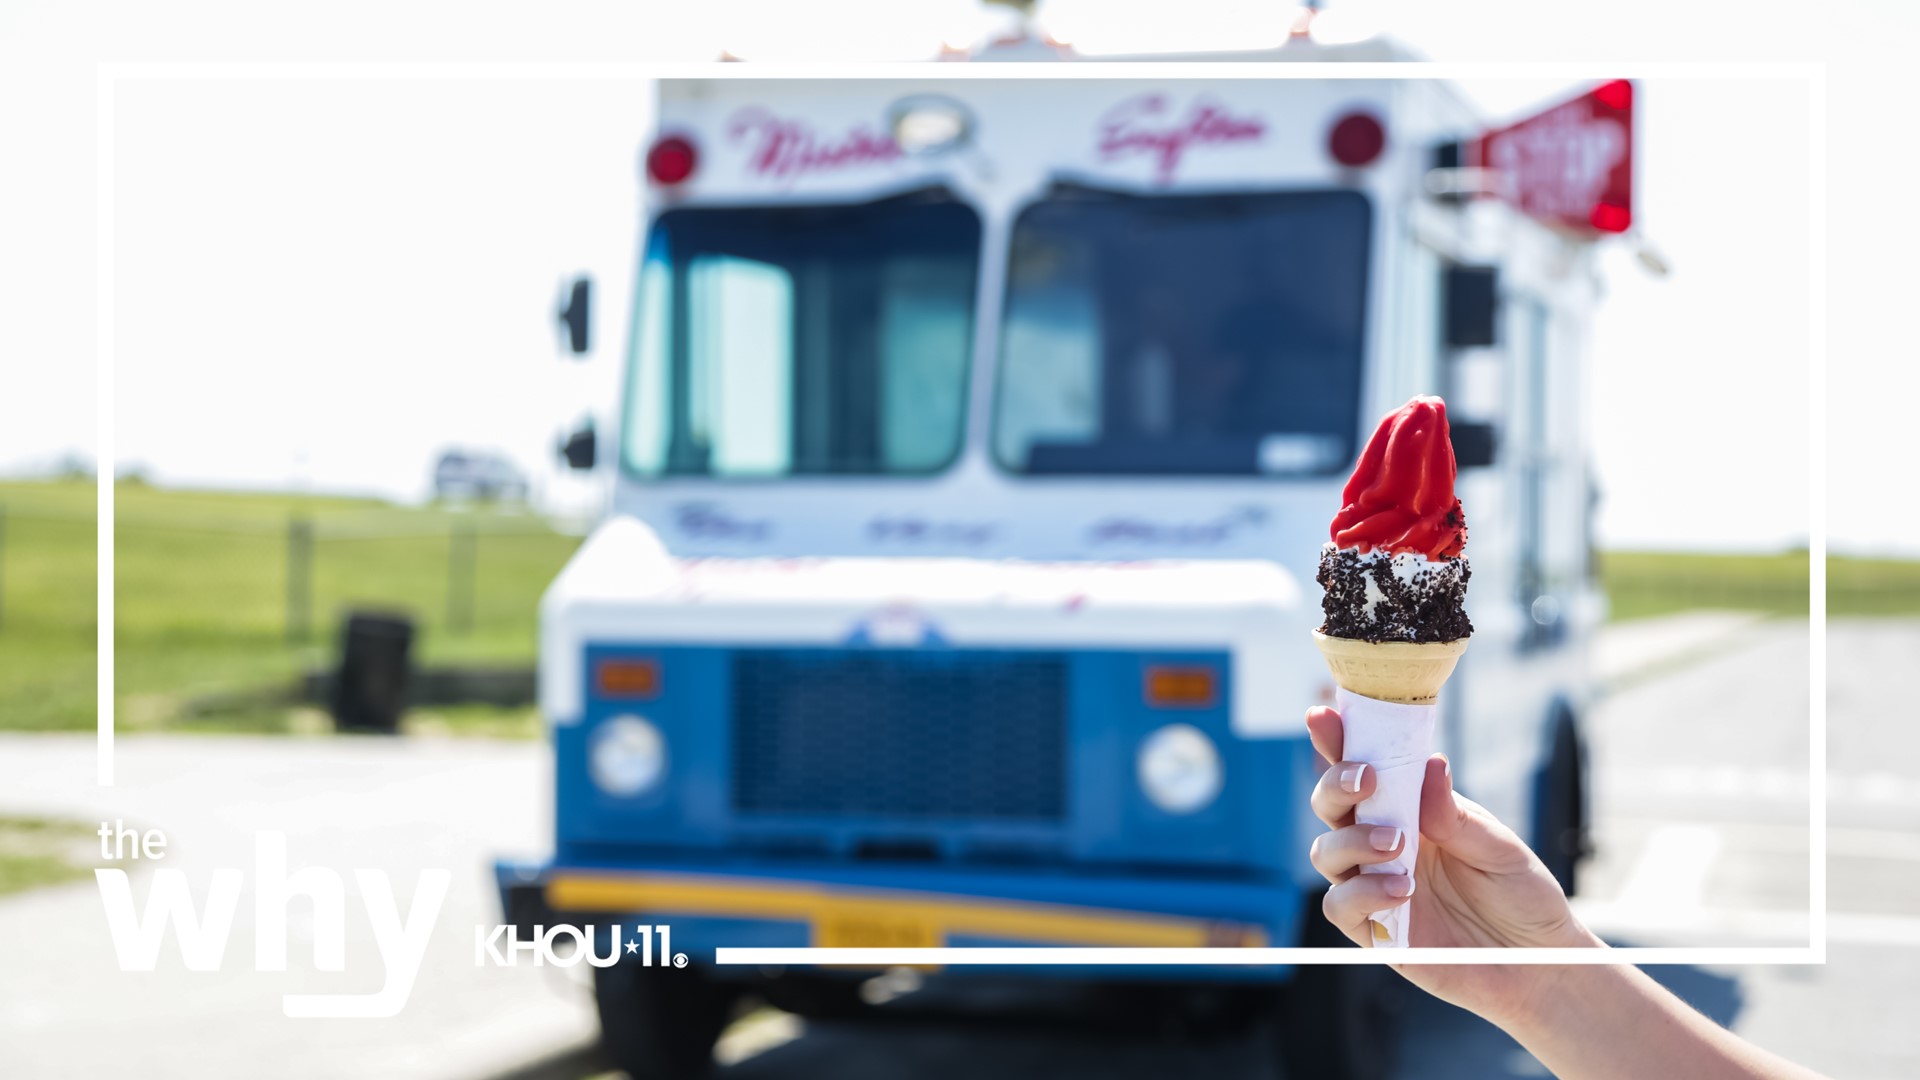 They are a beloved sign of summer, the ice cream truck rolling down the road playing a cheerful tune that alerts children blocks away that sweet treats have arrived.